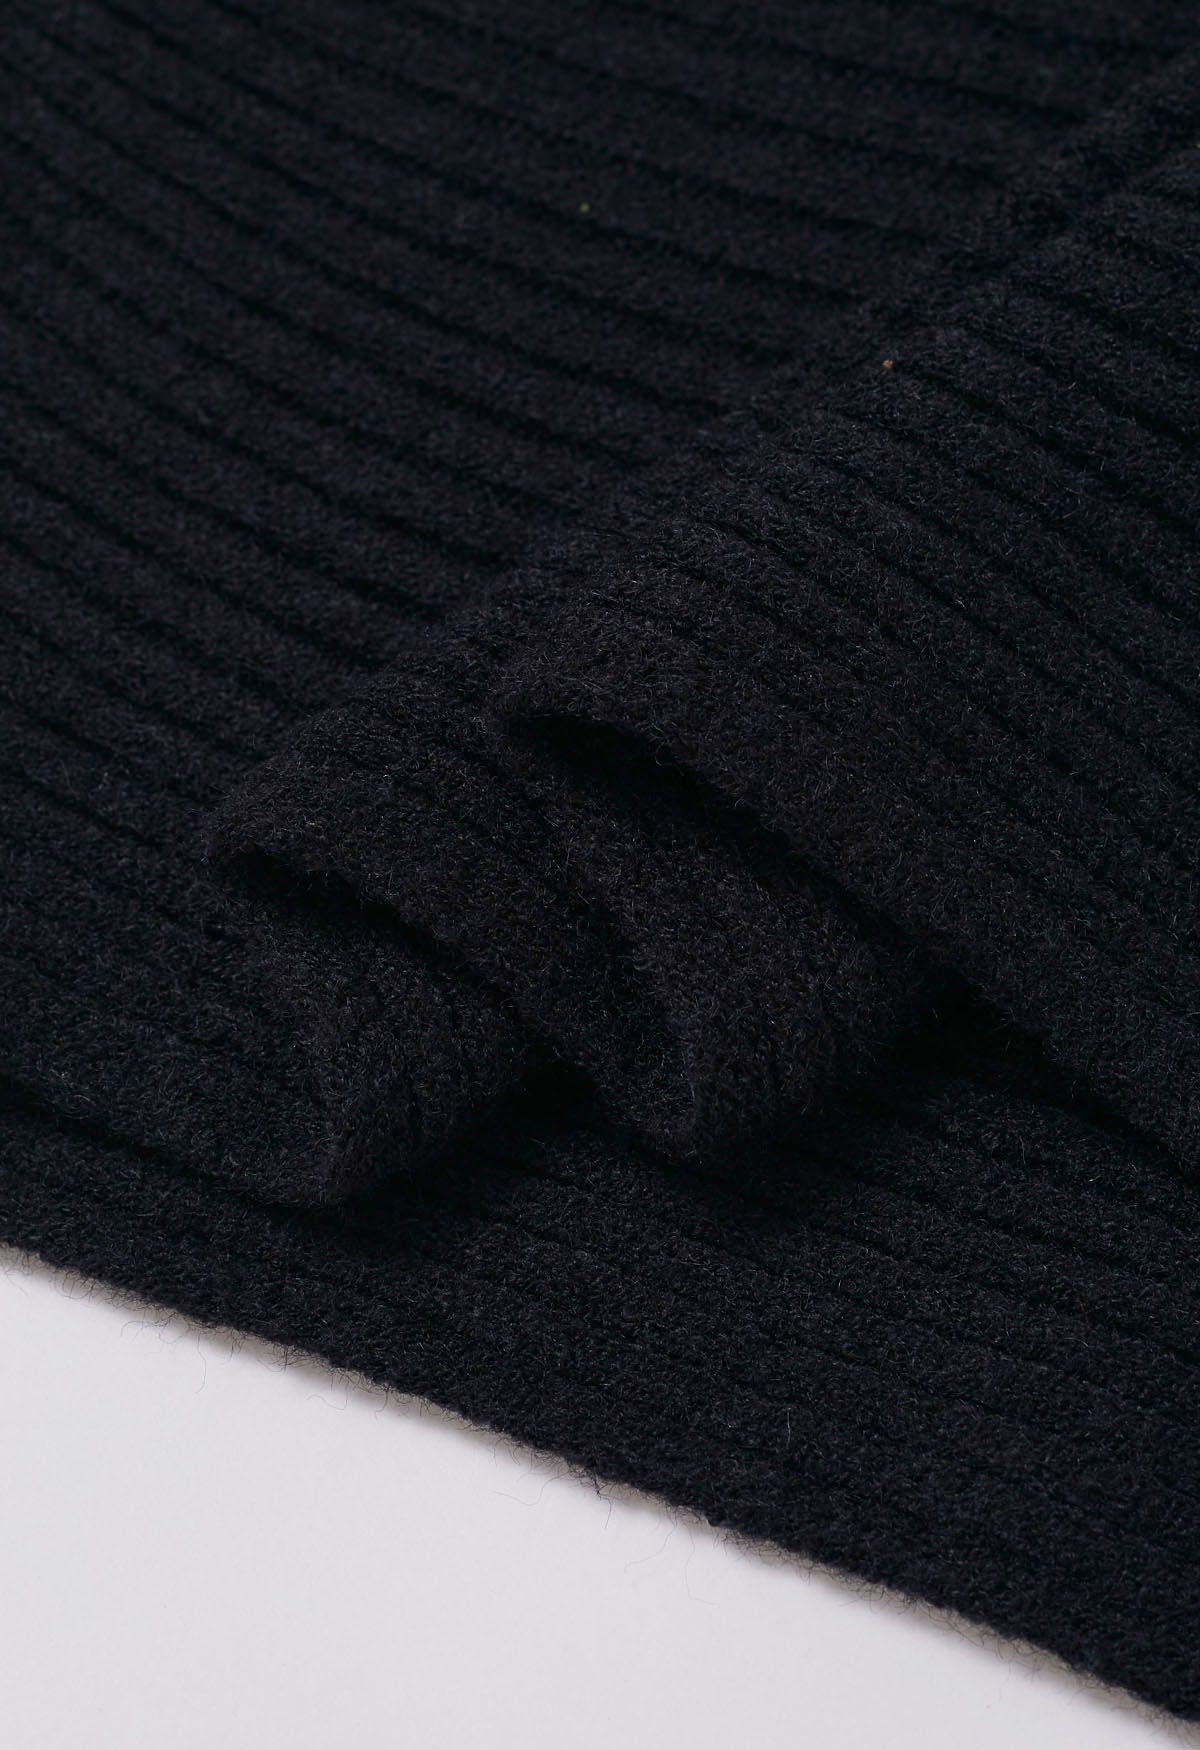 Dramatic Batwing Sleeve Ribbed Knit Sweater in Black